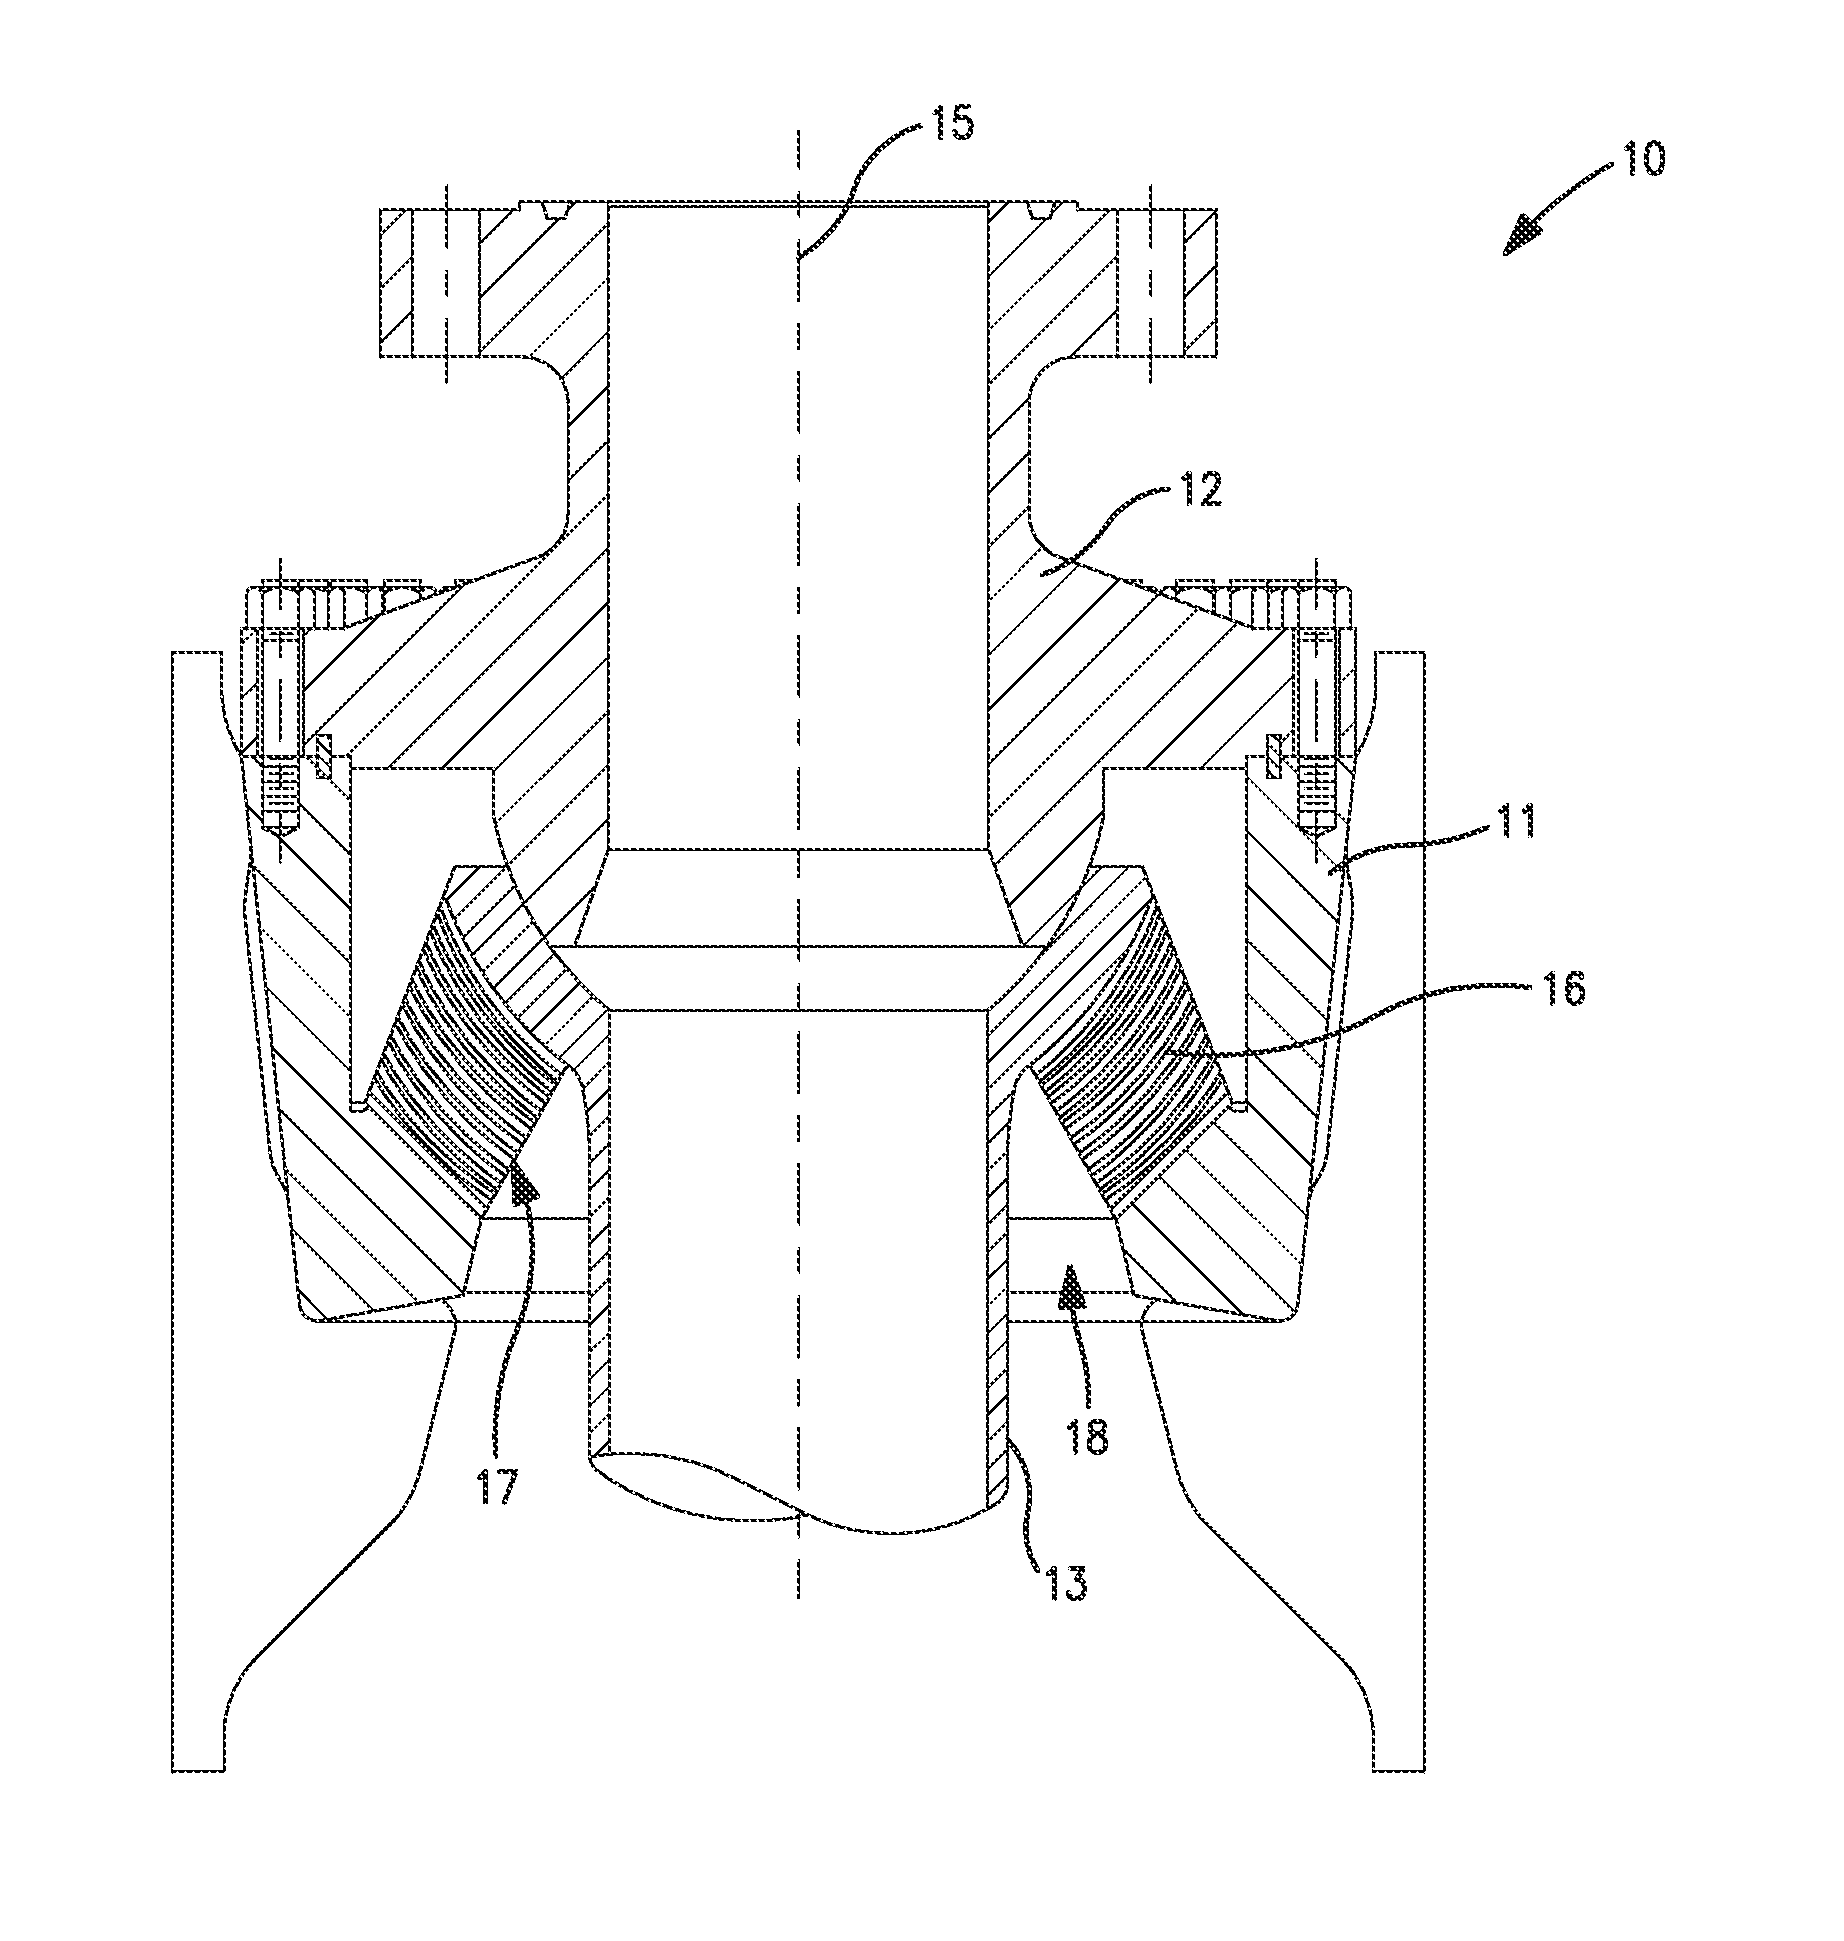 Apparatus and methods for inspecting and cleaning subsea flex joints